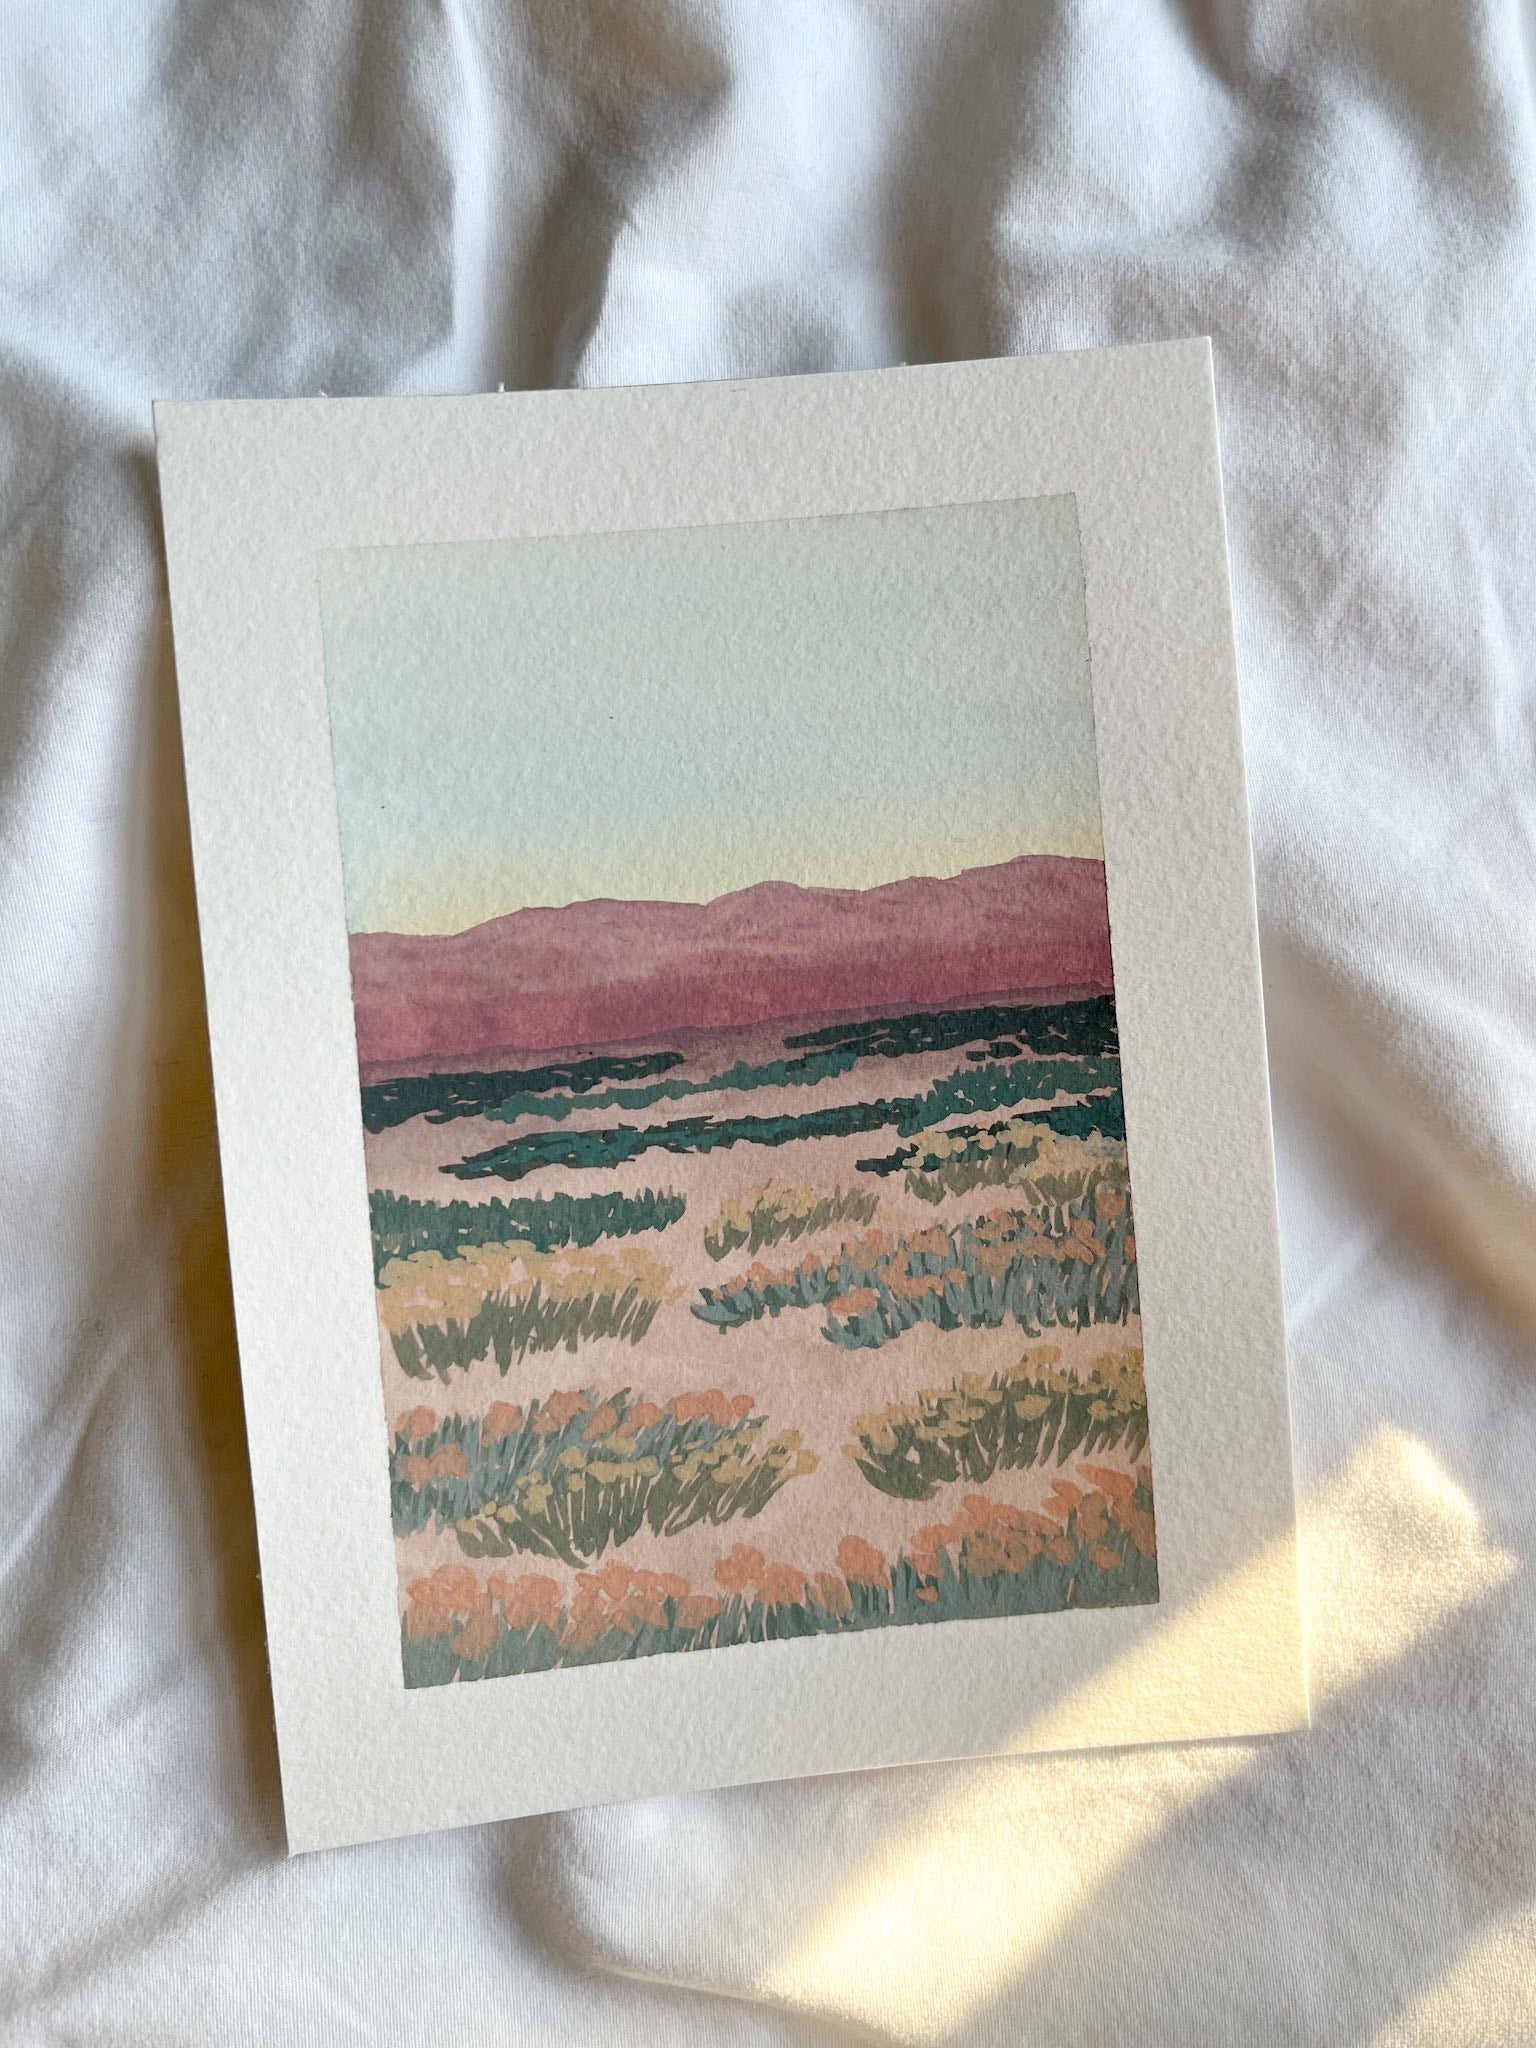 Why I paint blooming deserts